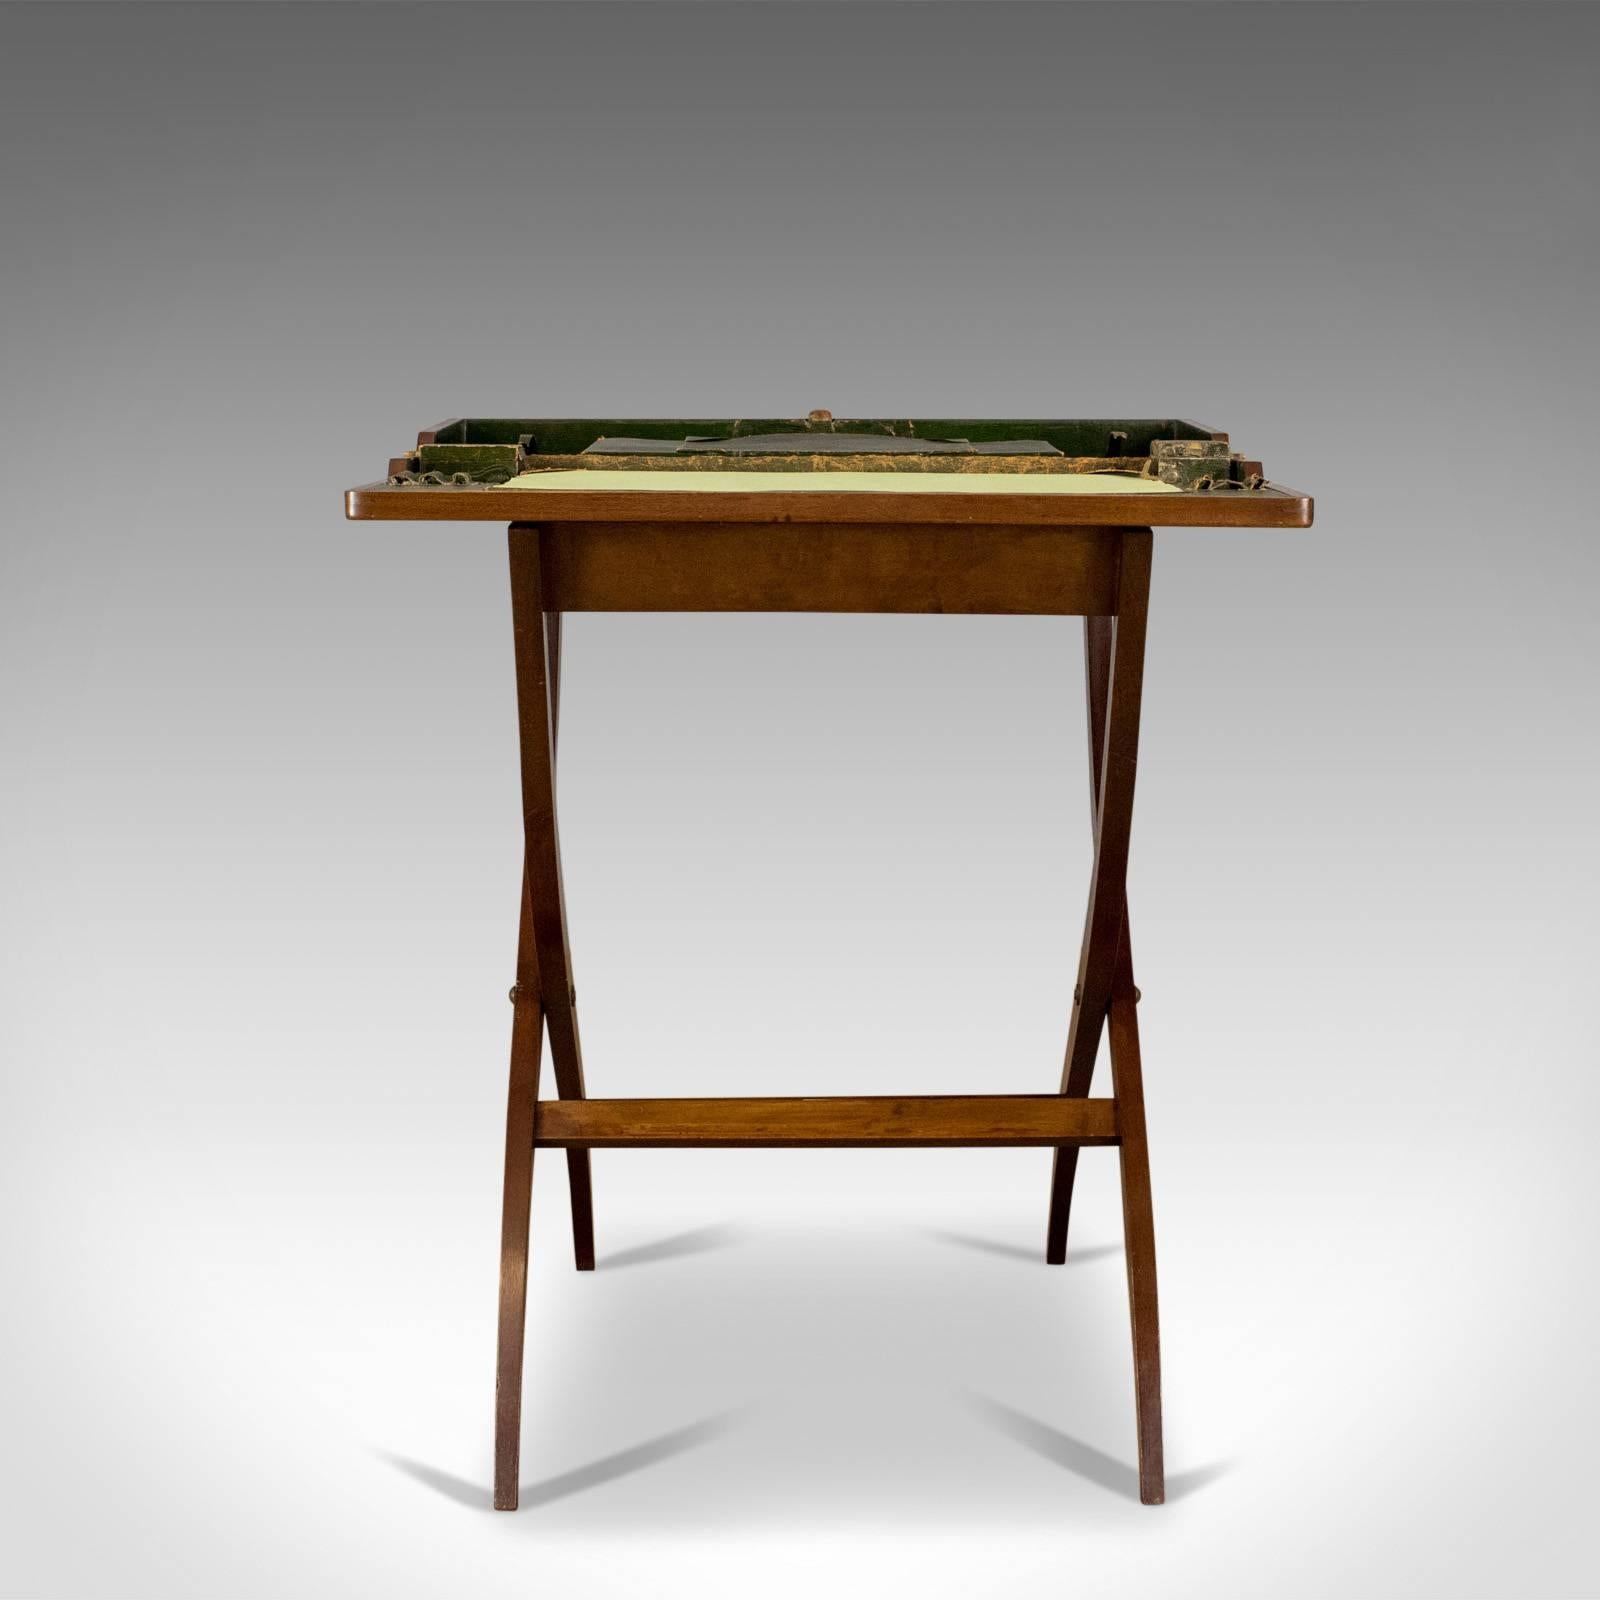 Complimentary front door shipping to the US, Canada, UK and the EU,

This is an antique coaching desk by Asprey London, an Edwardian folding, portable, travel writing table dating to circa 1910.

A superb example of an antique coaching desk
In